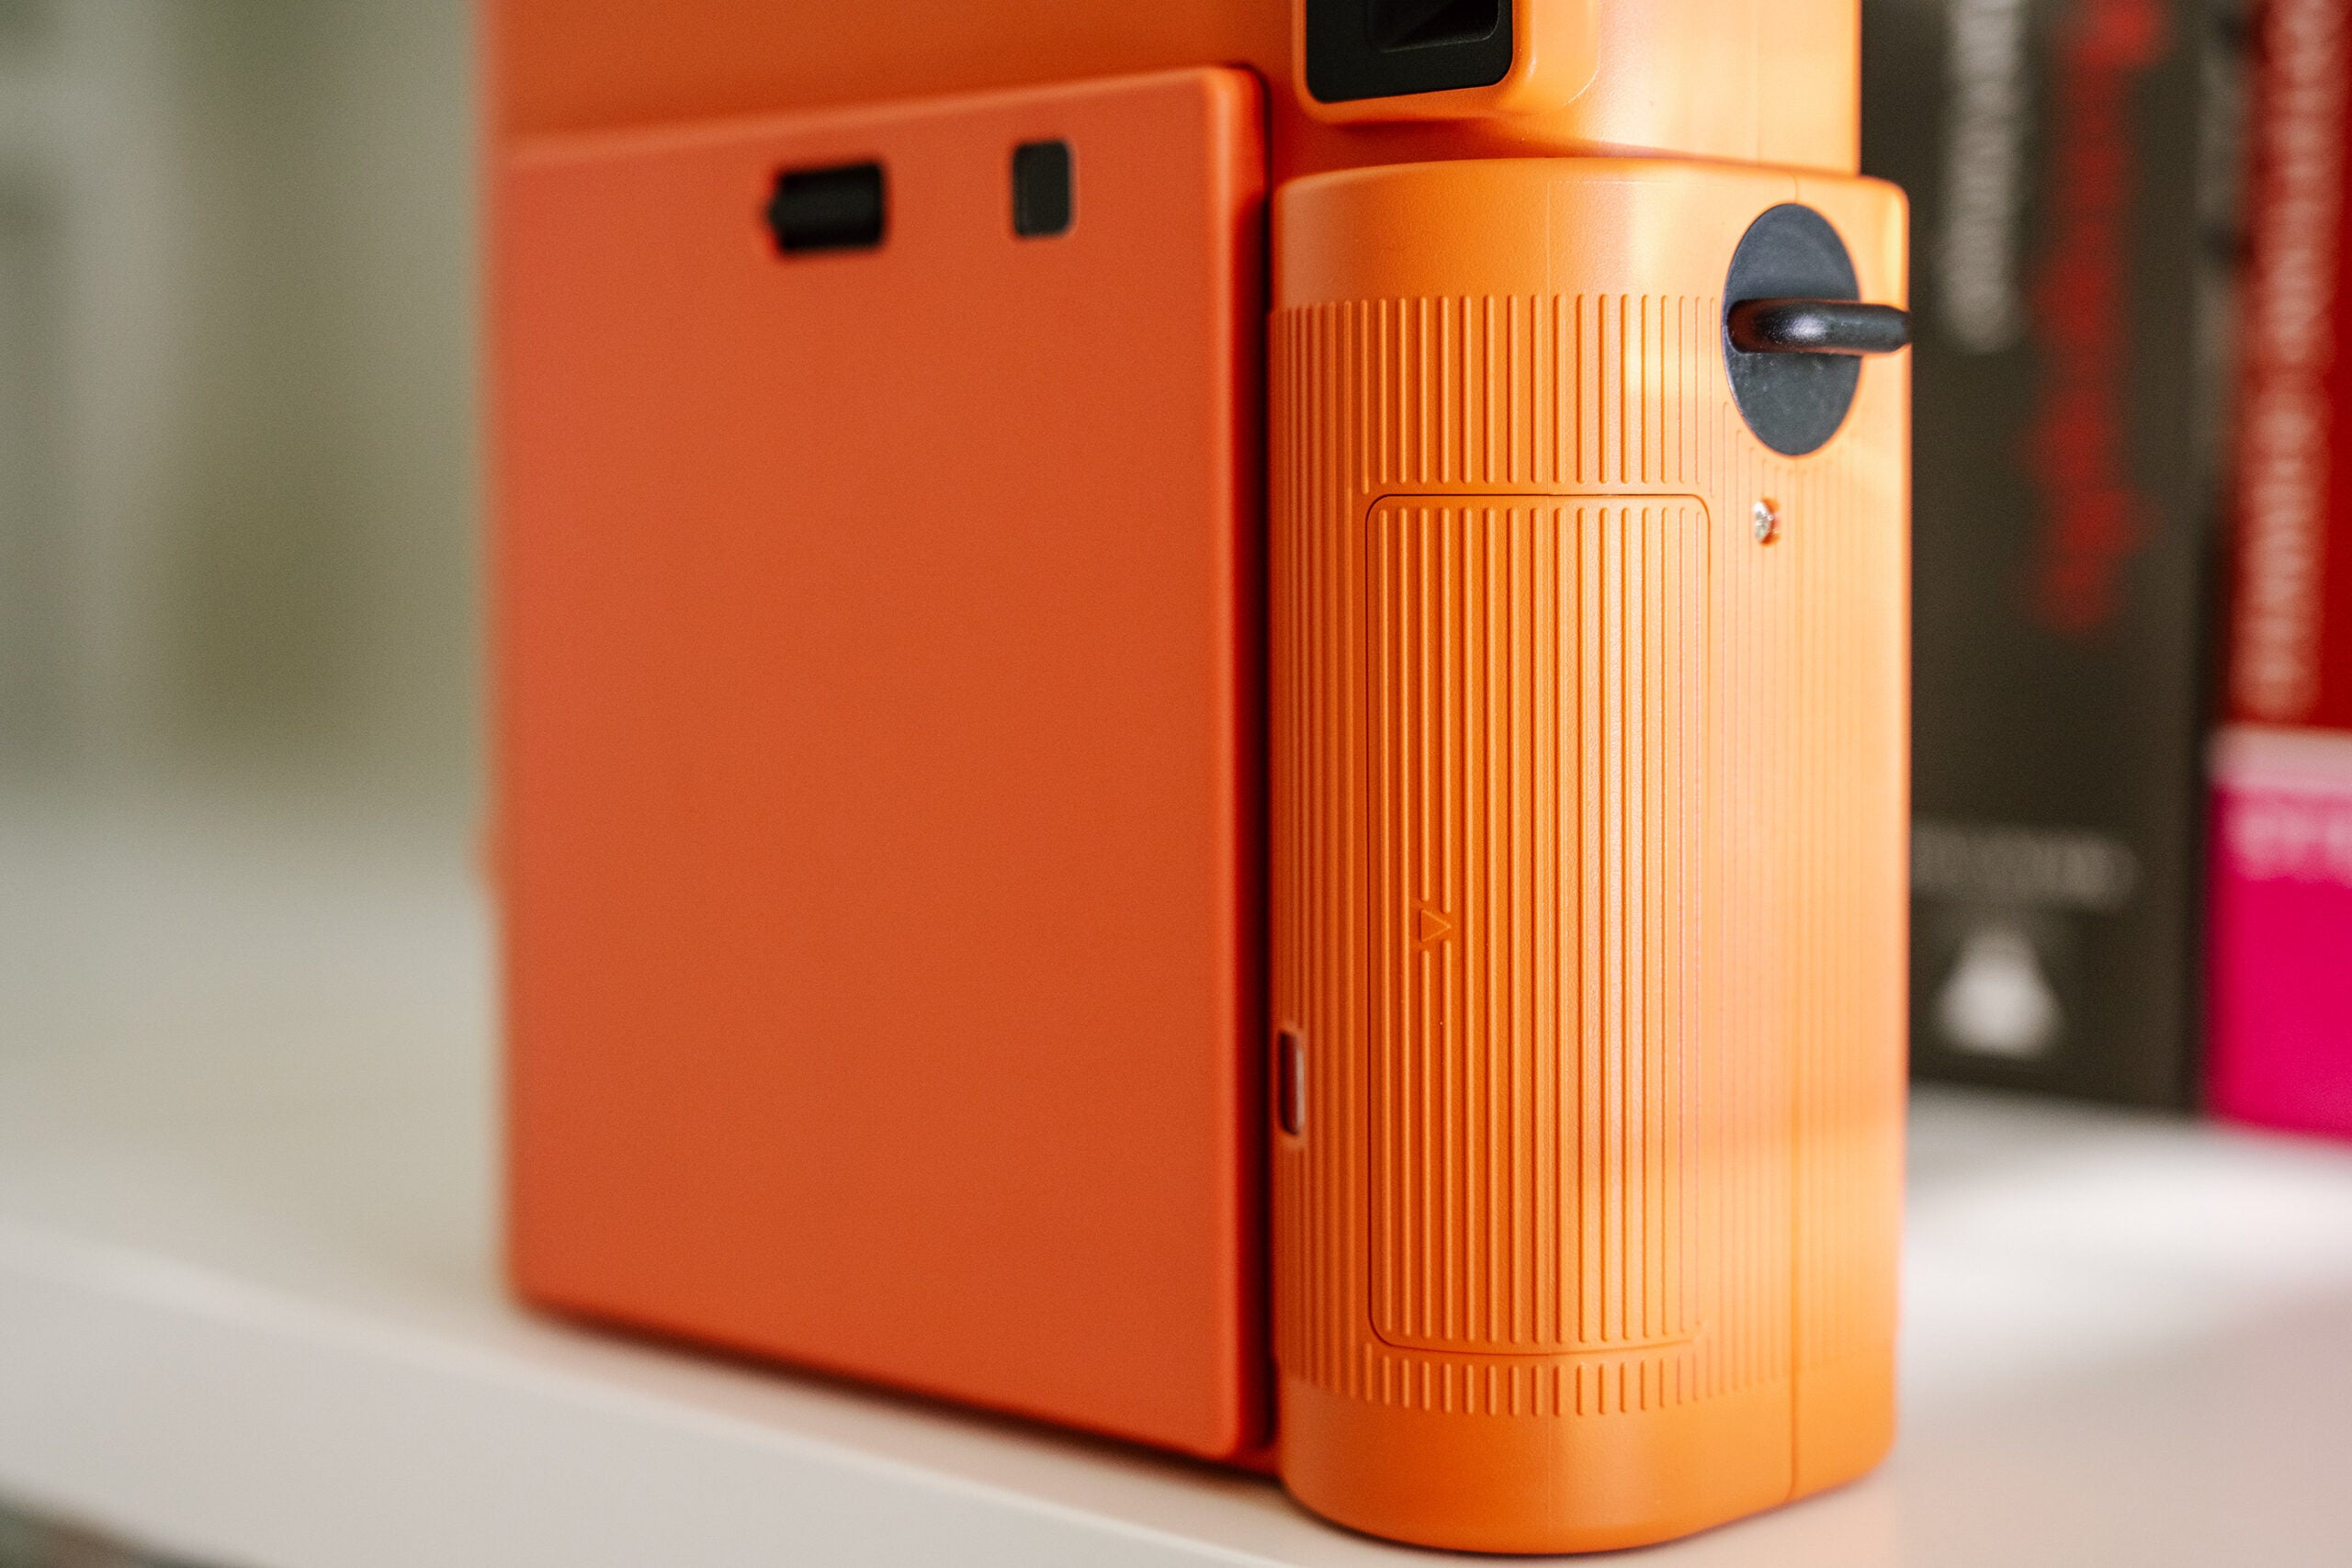 Texturized side of the Terracotta Orange Instax Square SQ1 instant camera